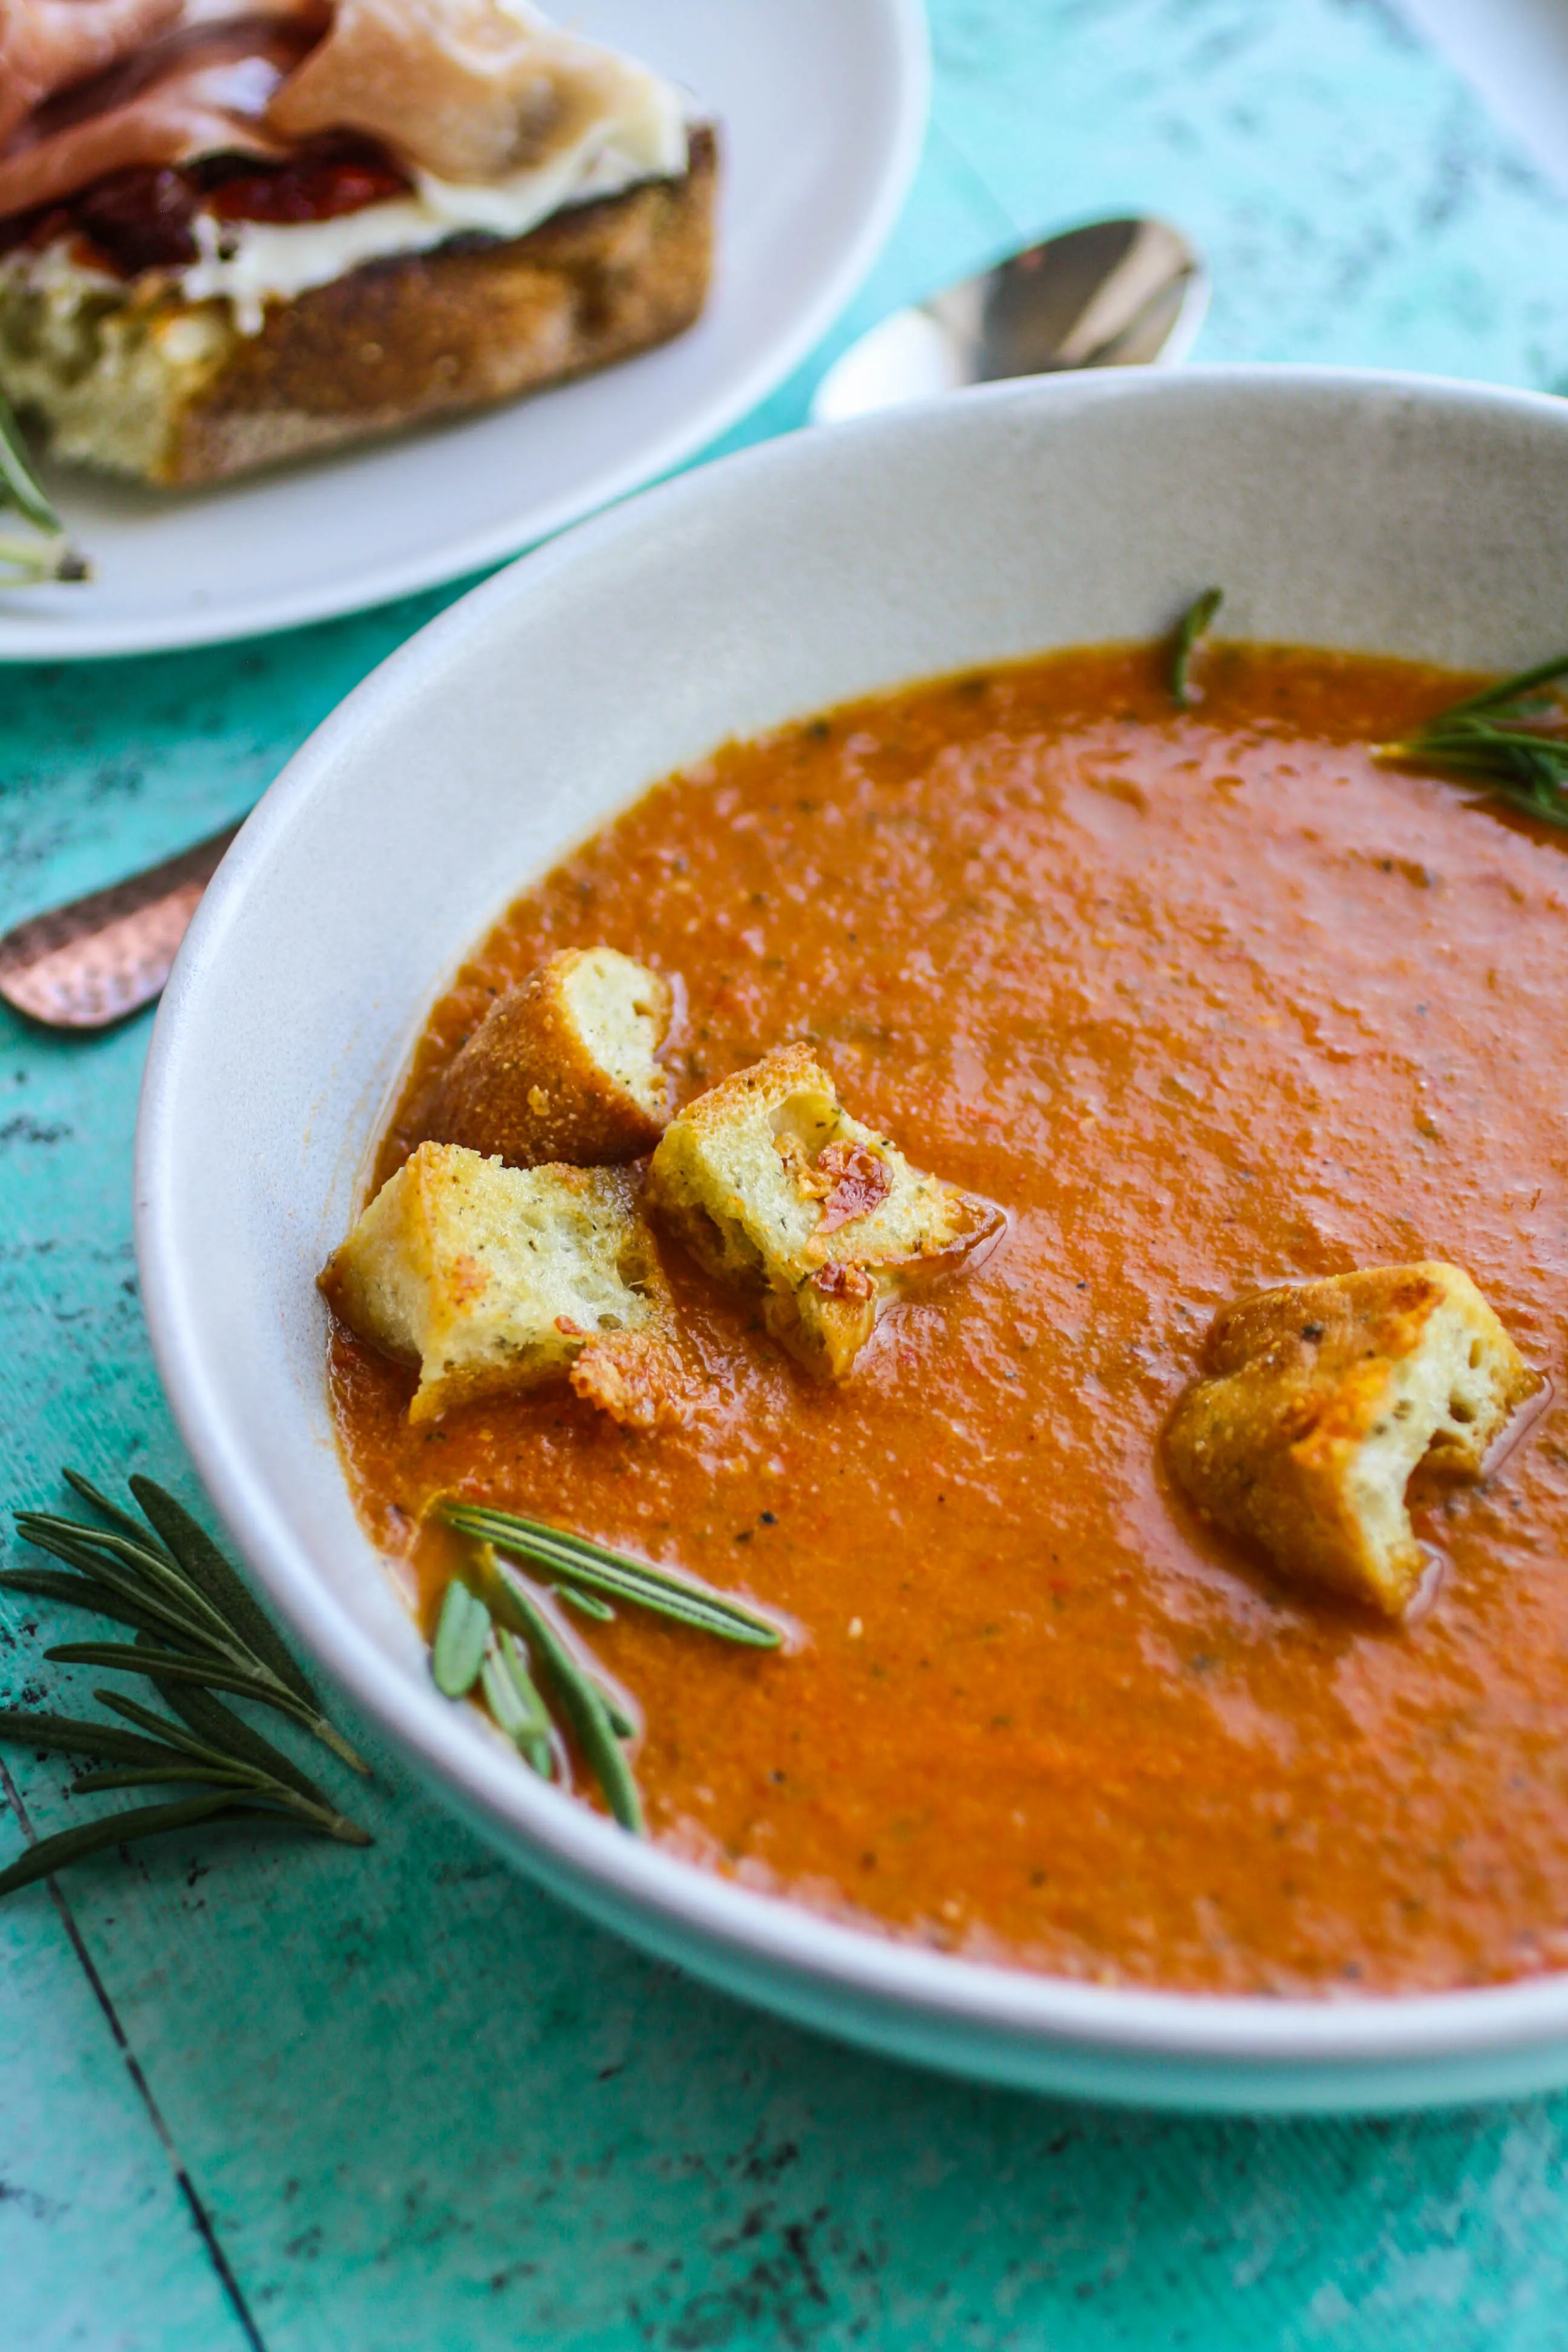 Roasted tomato and vegetable soup with gin drizzle is a filling and flavorful soup. Roasted tomato and vegetable soup with gin drizzle is a great dish for the summer season.